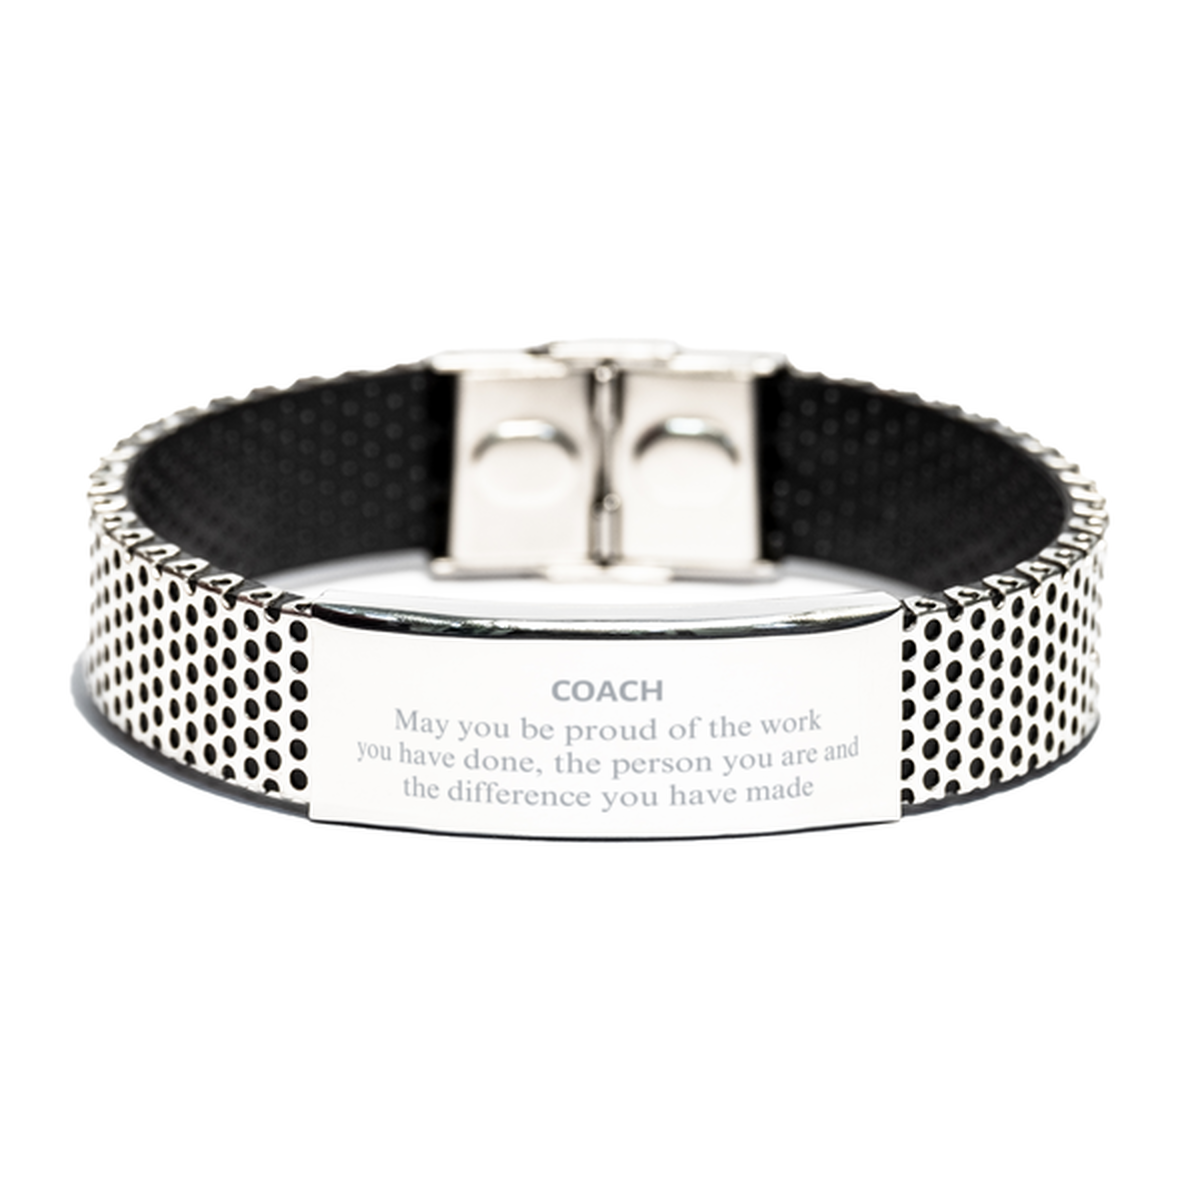 Coach May you be proud of the work you have done, Retirement Coach Stainless Steel Bracelet for Colleague Appreciation Gifts Amazing for Coach